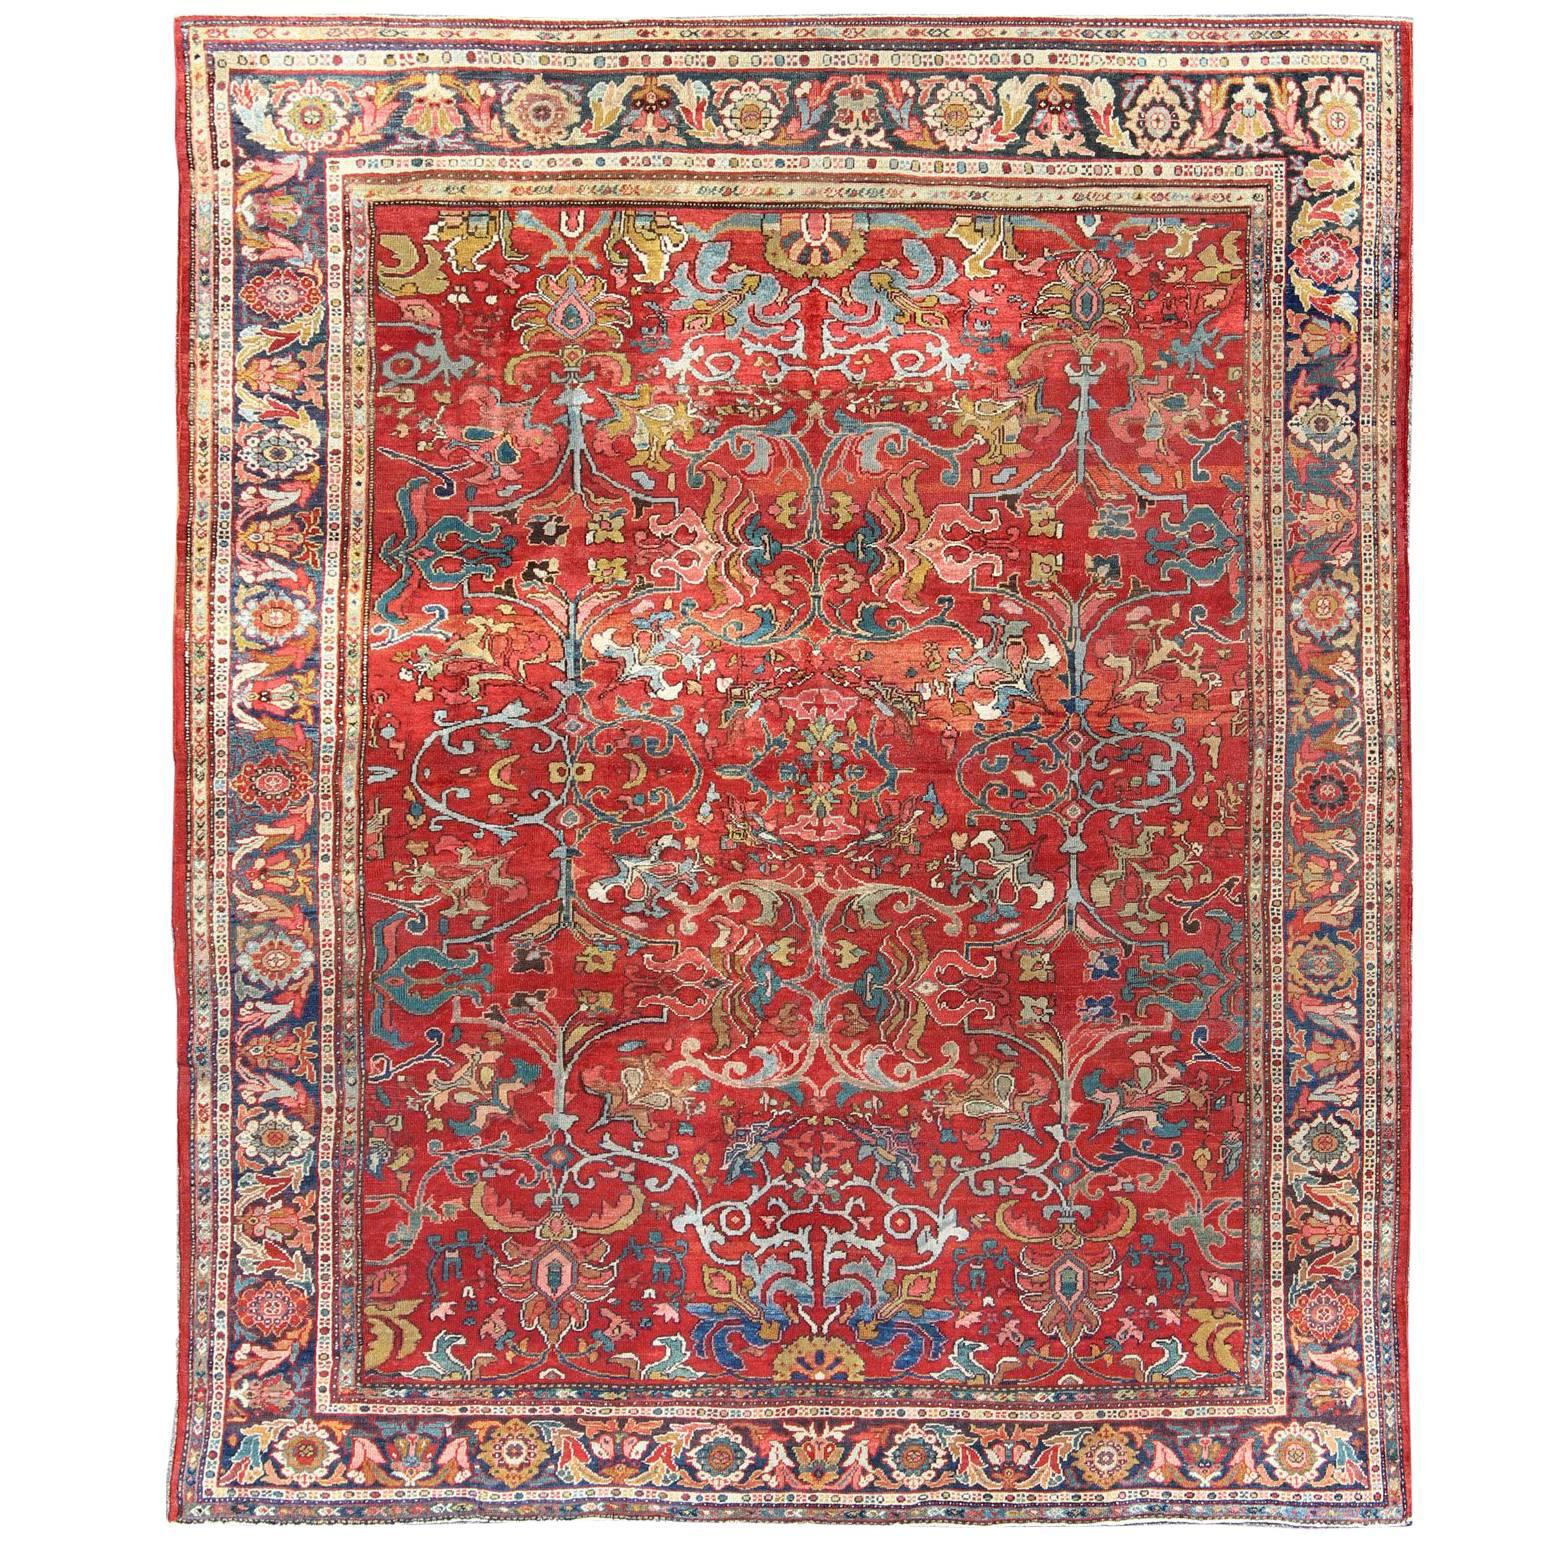 Colorful Antique Persian Sultanabad Rug with All Over Design in Jewel tones